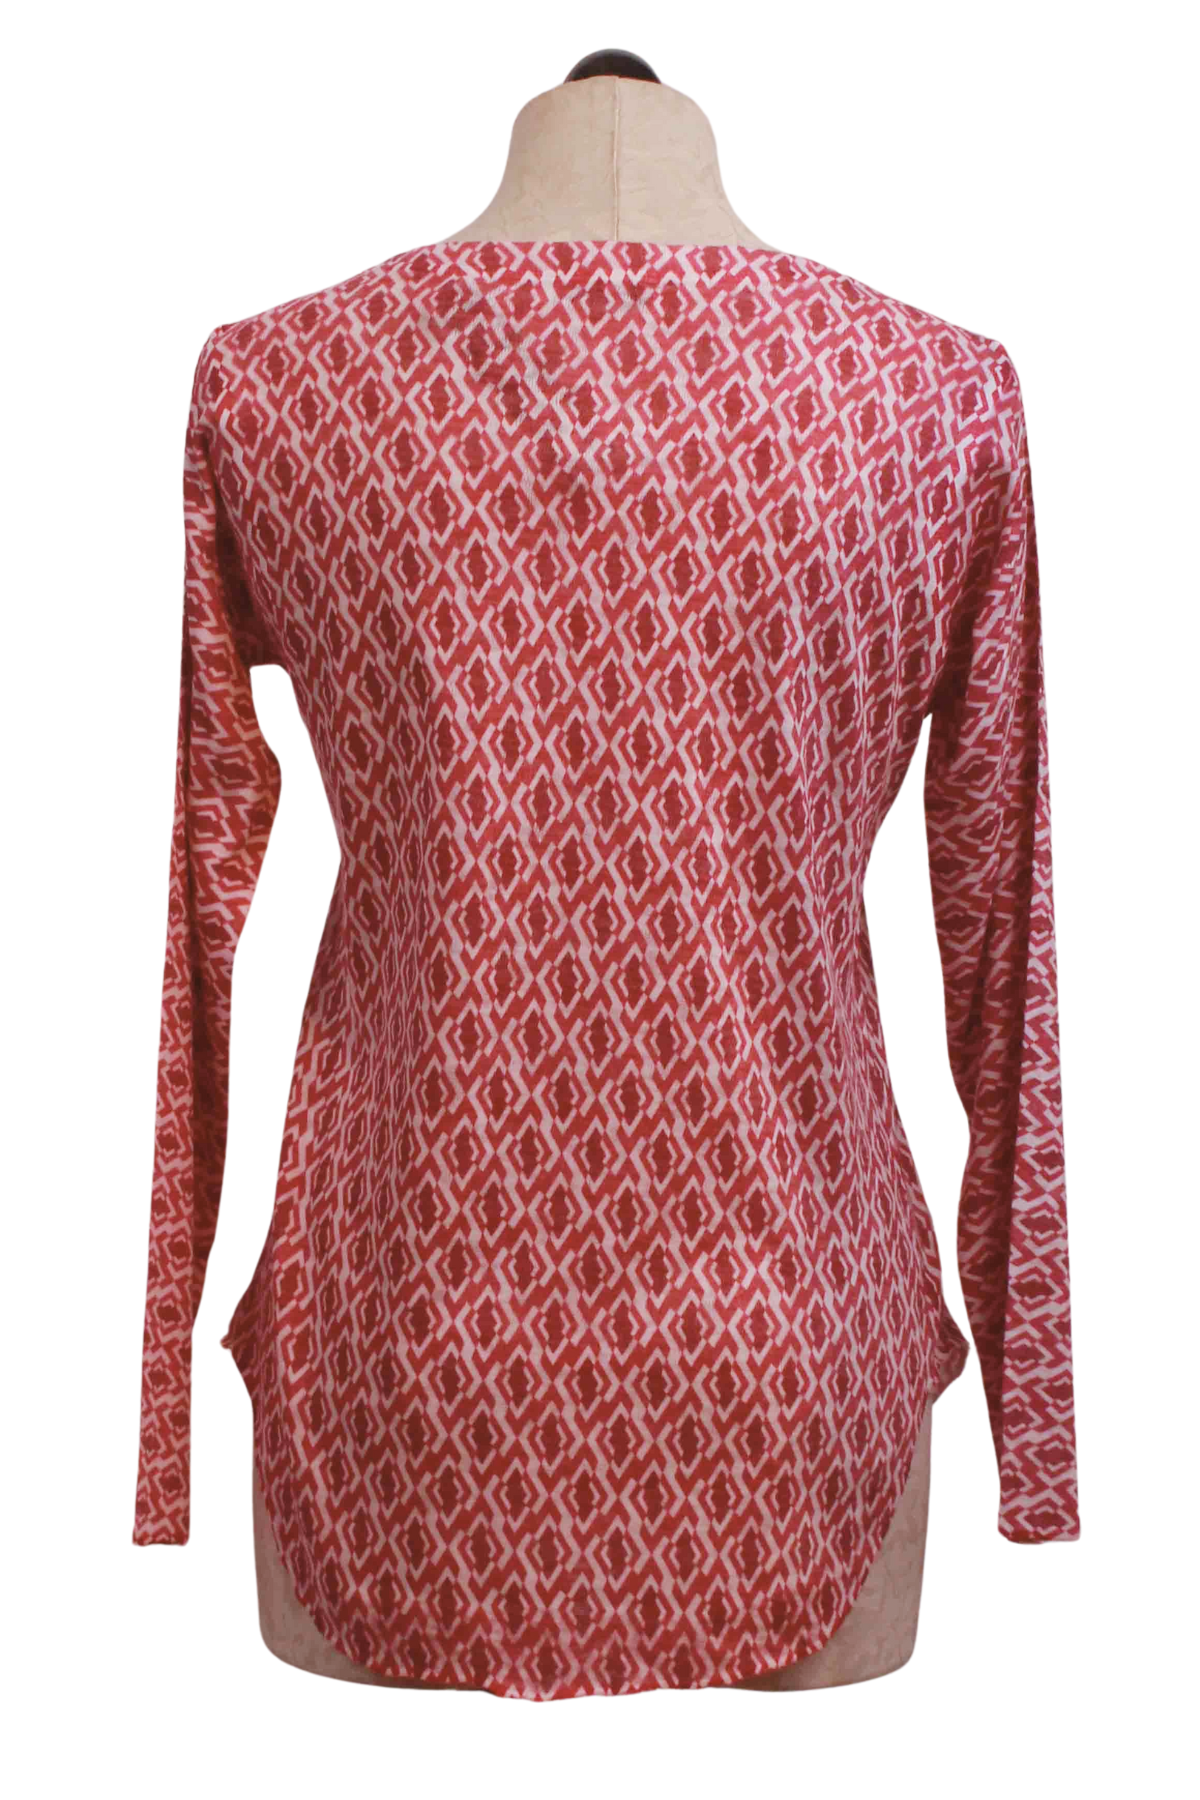 back view of Pink and White Long Sleeve, Curved Hem Geo Pop Print Top by Nally and Millie